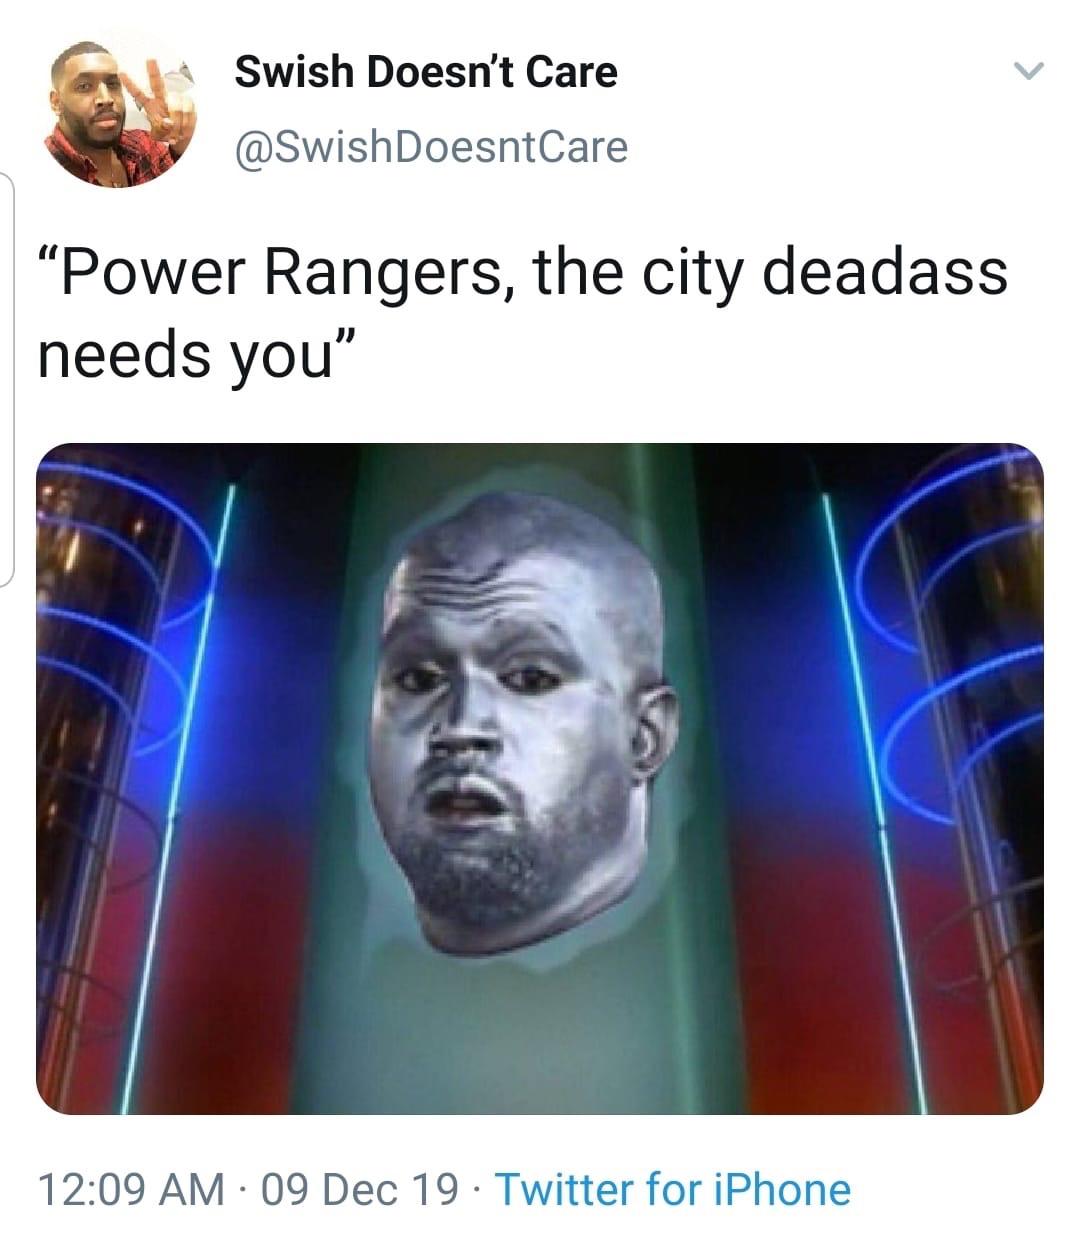 human - Swish Doesn't Care Power Rangers, the city deadass needs you" 09 Dec 19 Twitter for iPhone